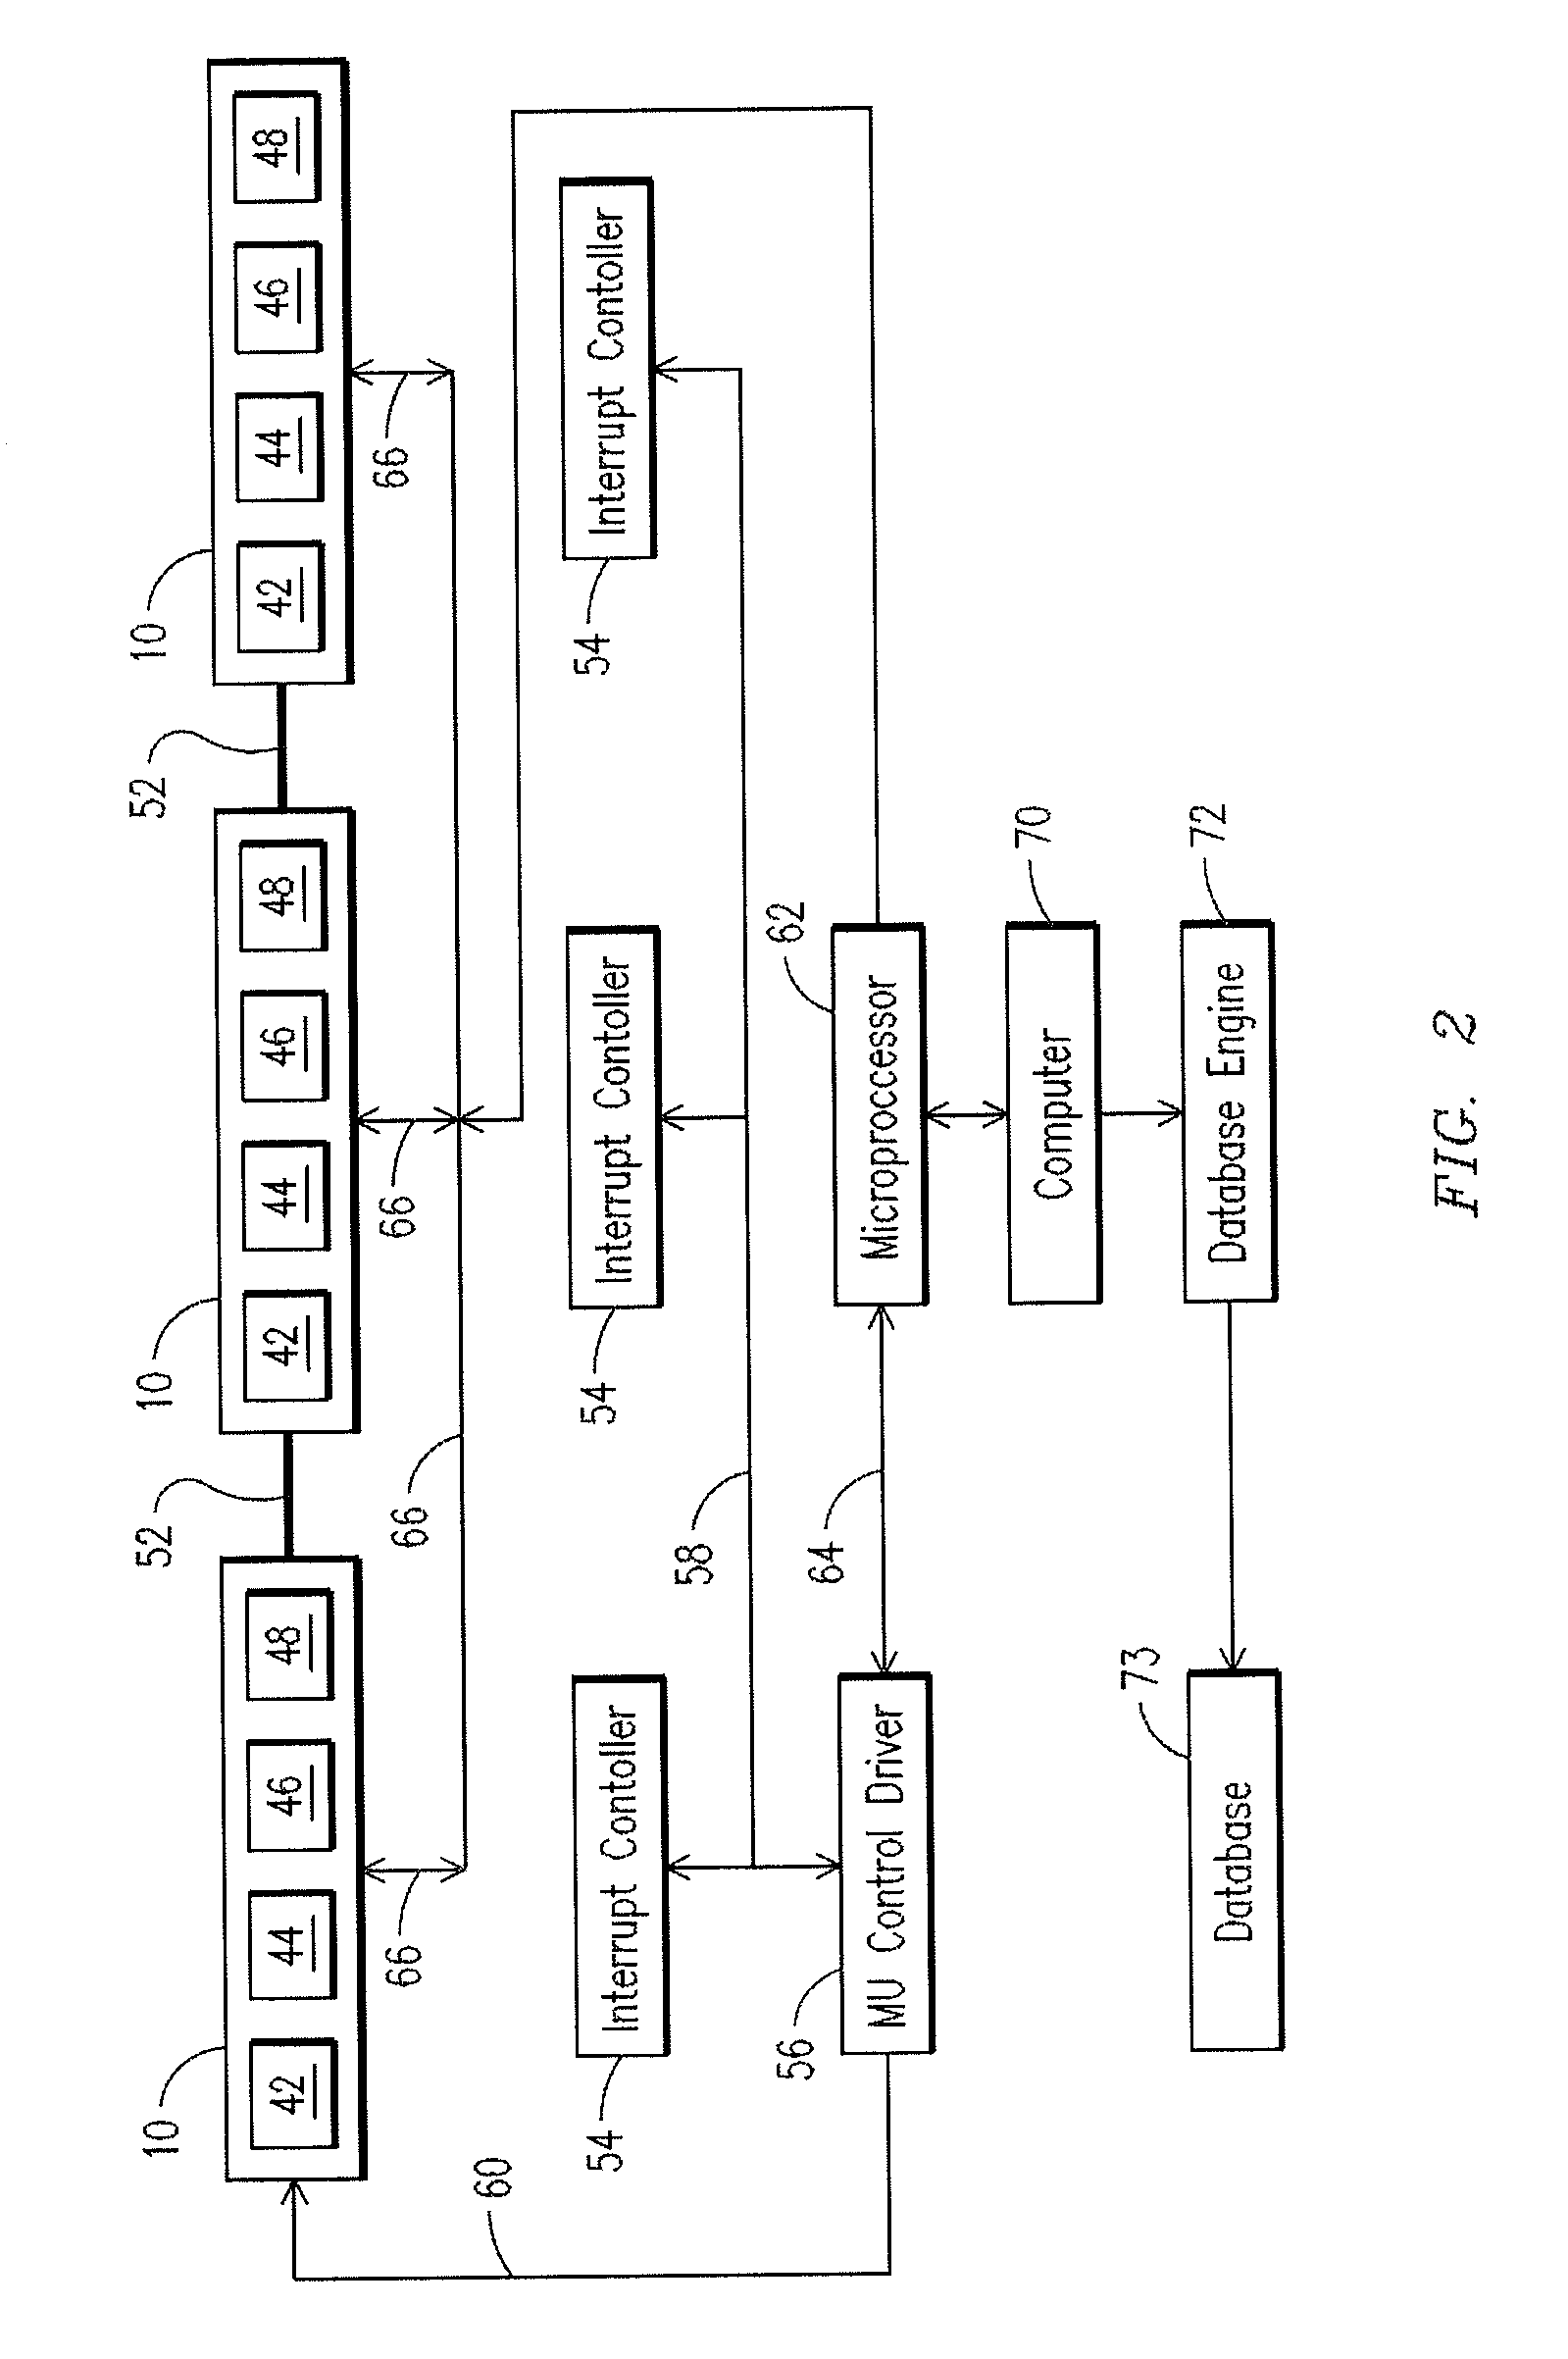 Method and system for data collection and analysis